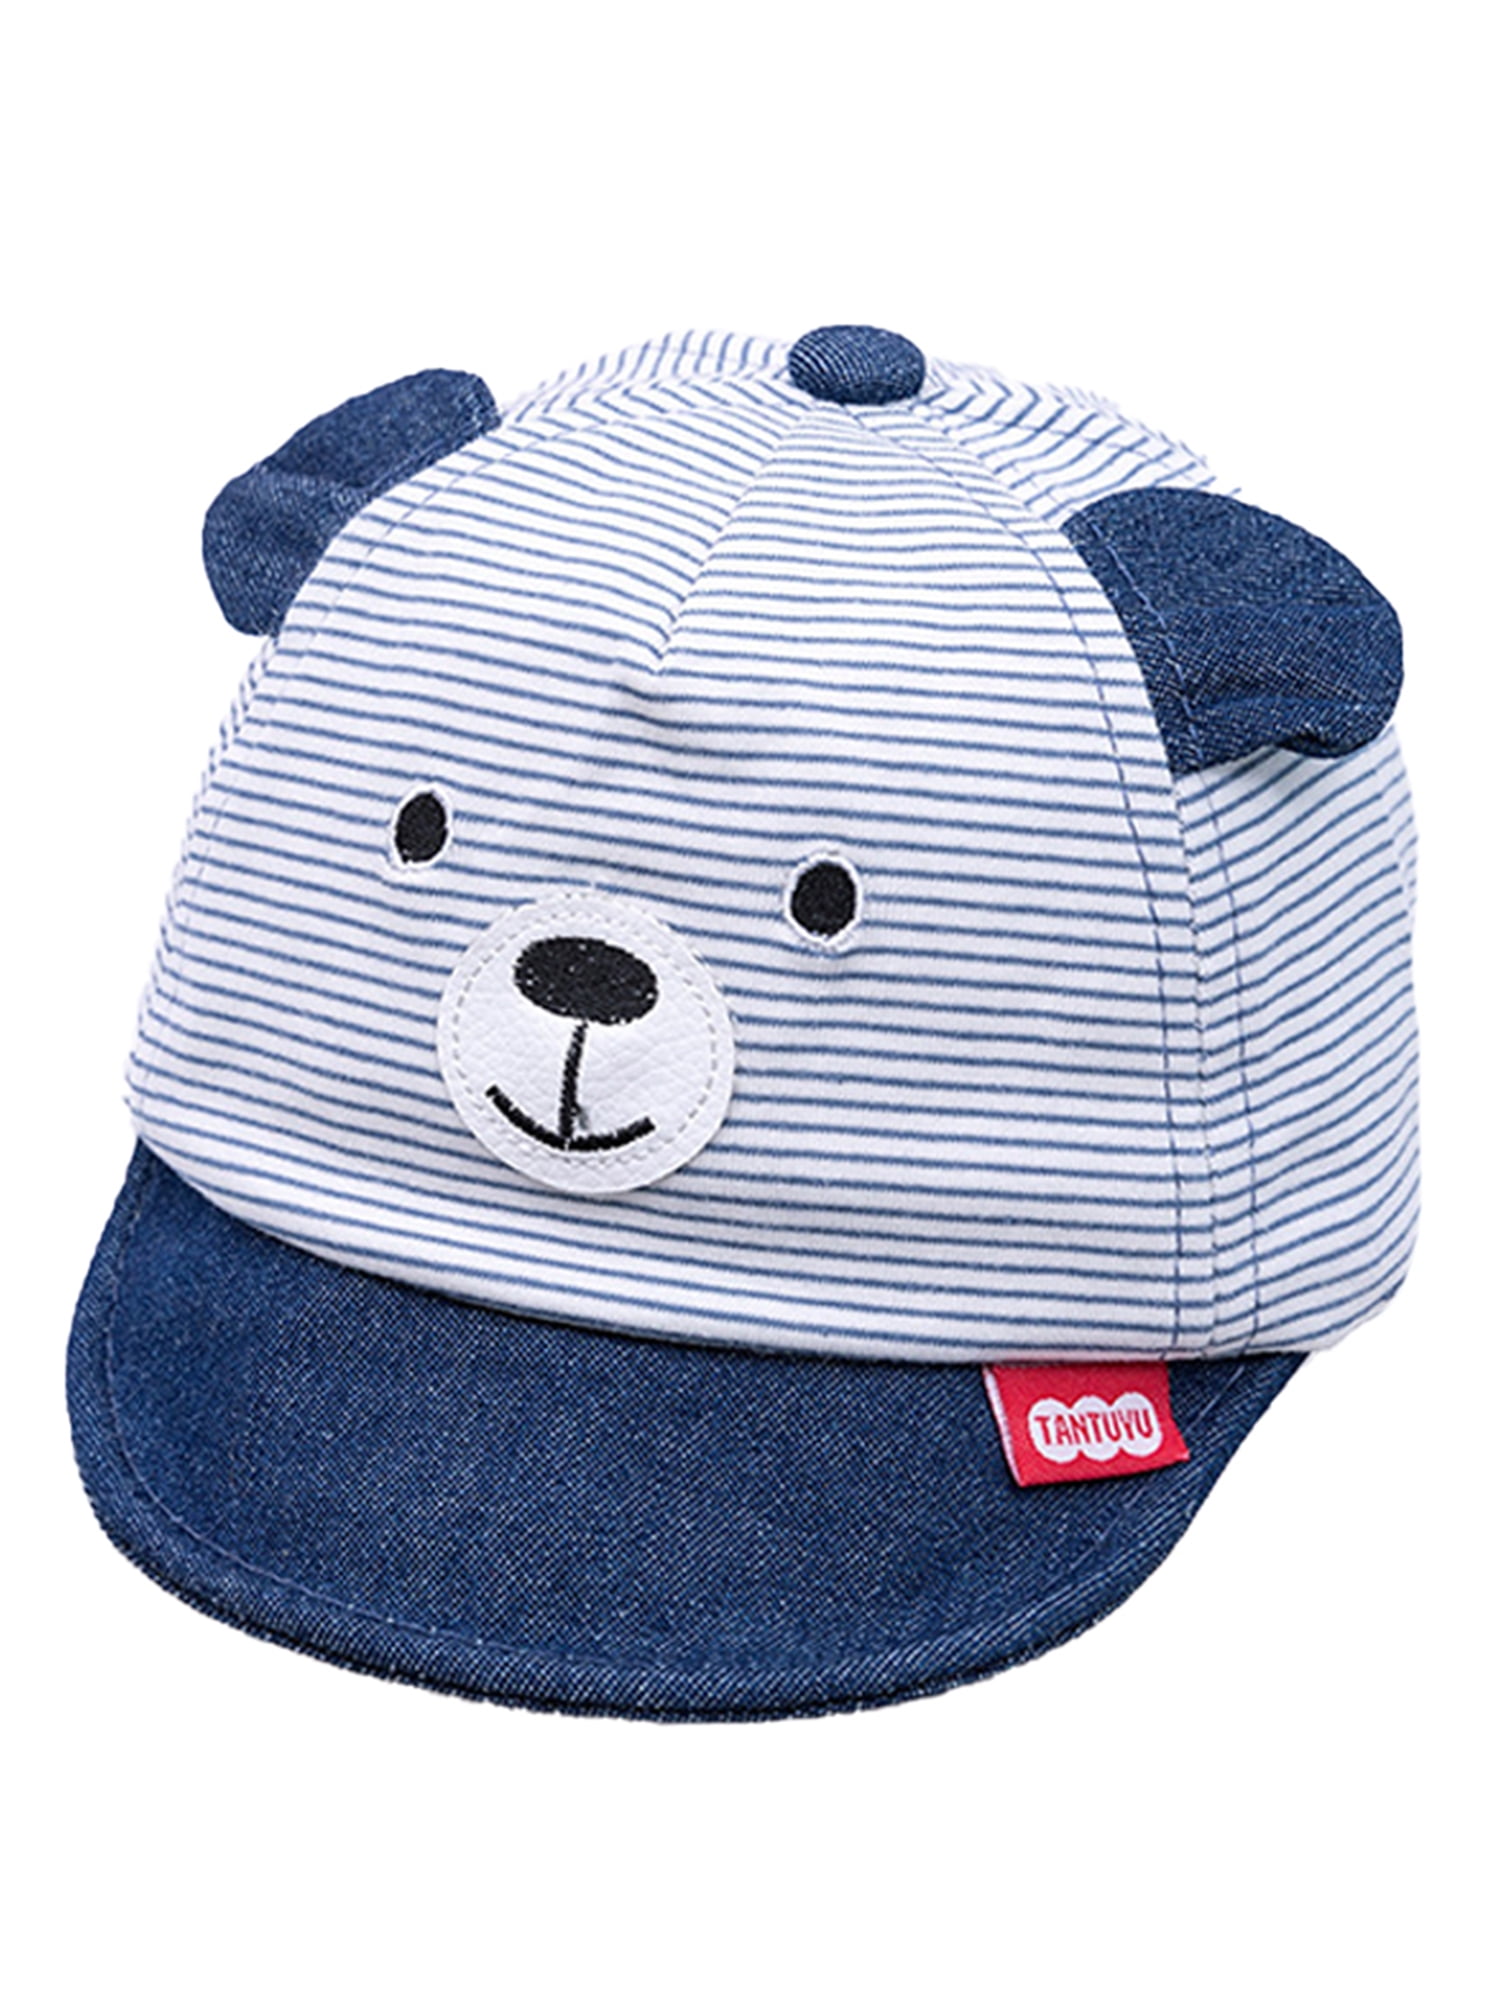 Light Blue Baby Toddler Boy Girl Cute Sun Cap Hat With Ears for 6-24 Months